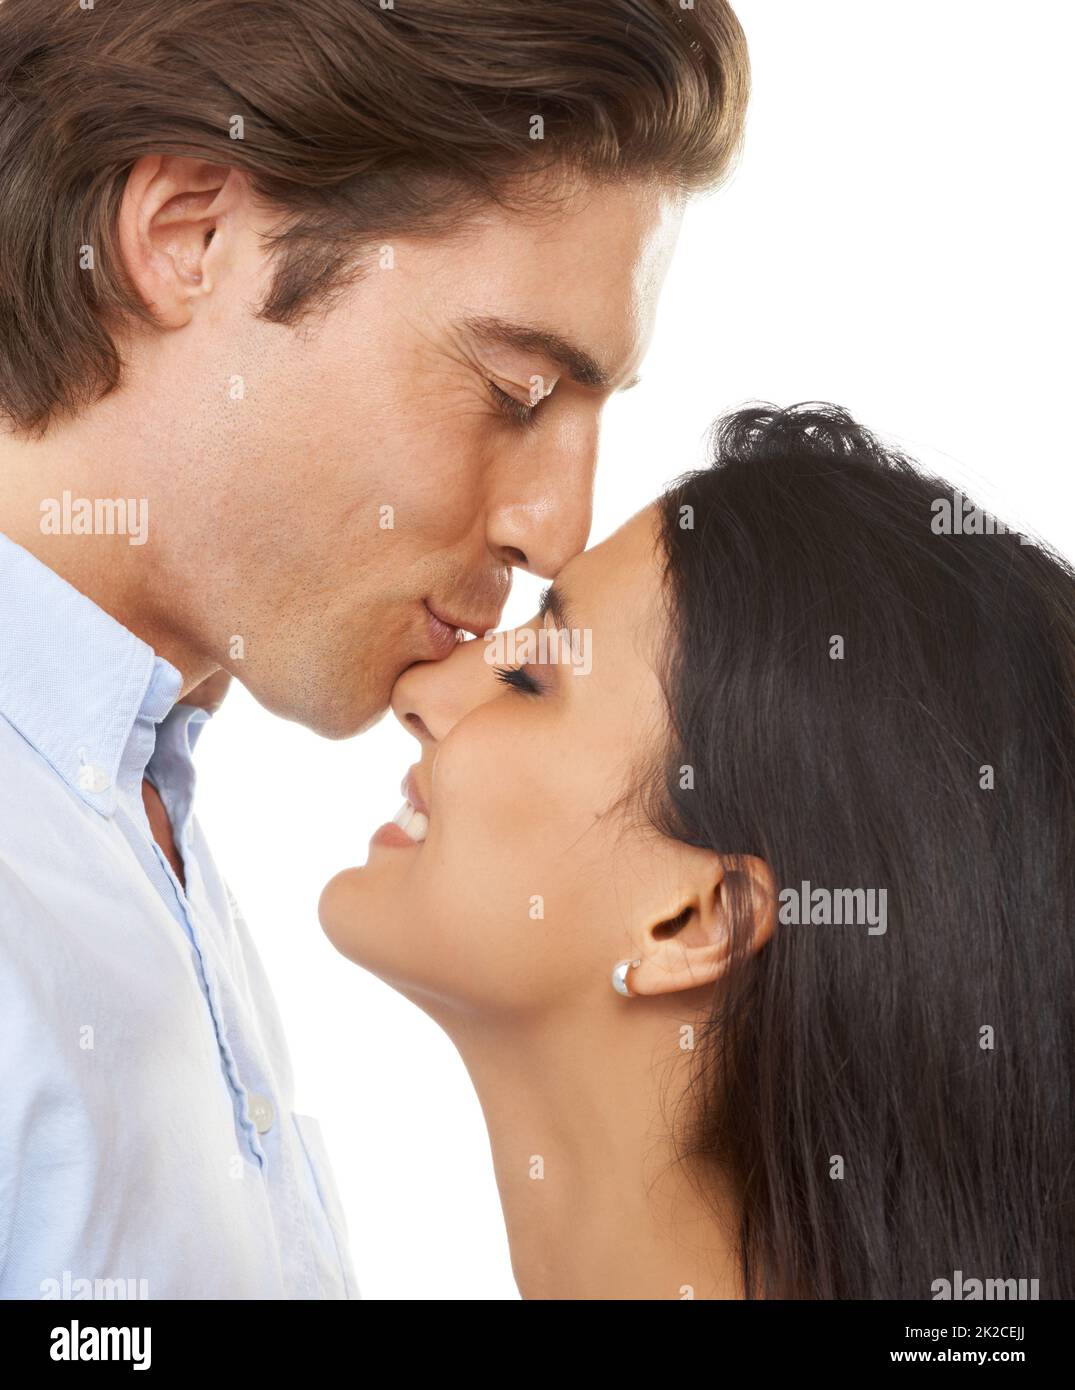 Shes adorable. A multi-ethnic couple isolated on a white background. Stock Photo